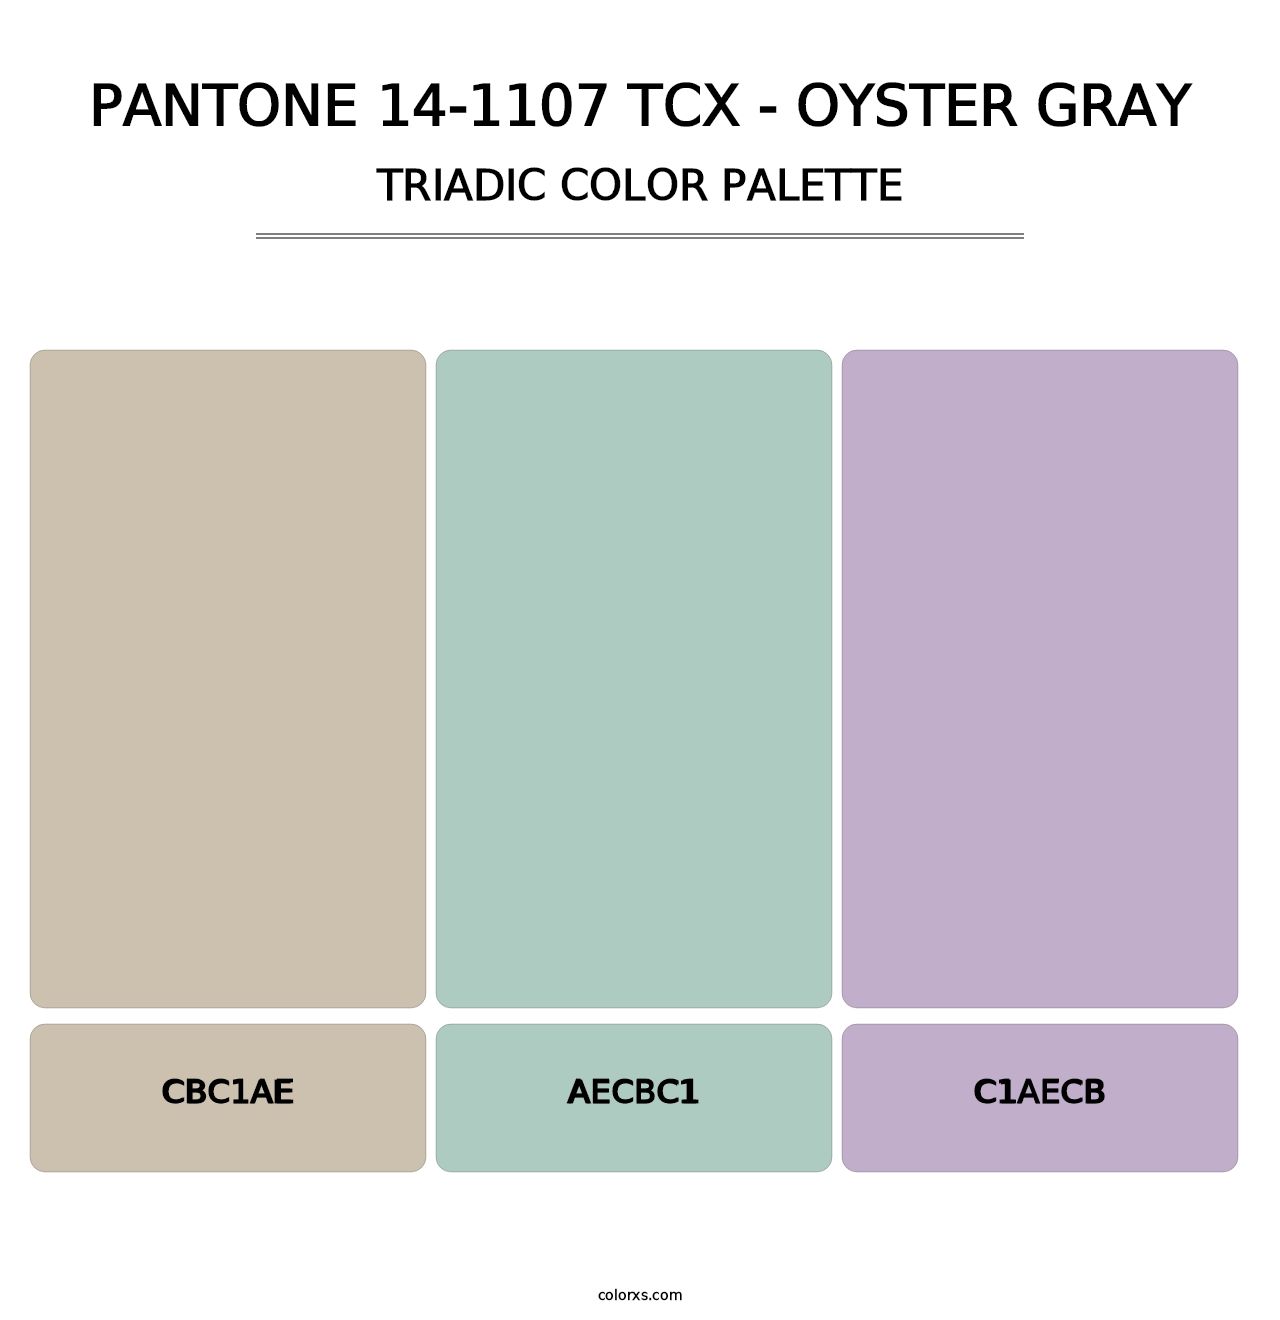 PANTONE 14-1107 TCX - Oyster Gray - Triadic Color Palette